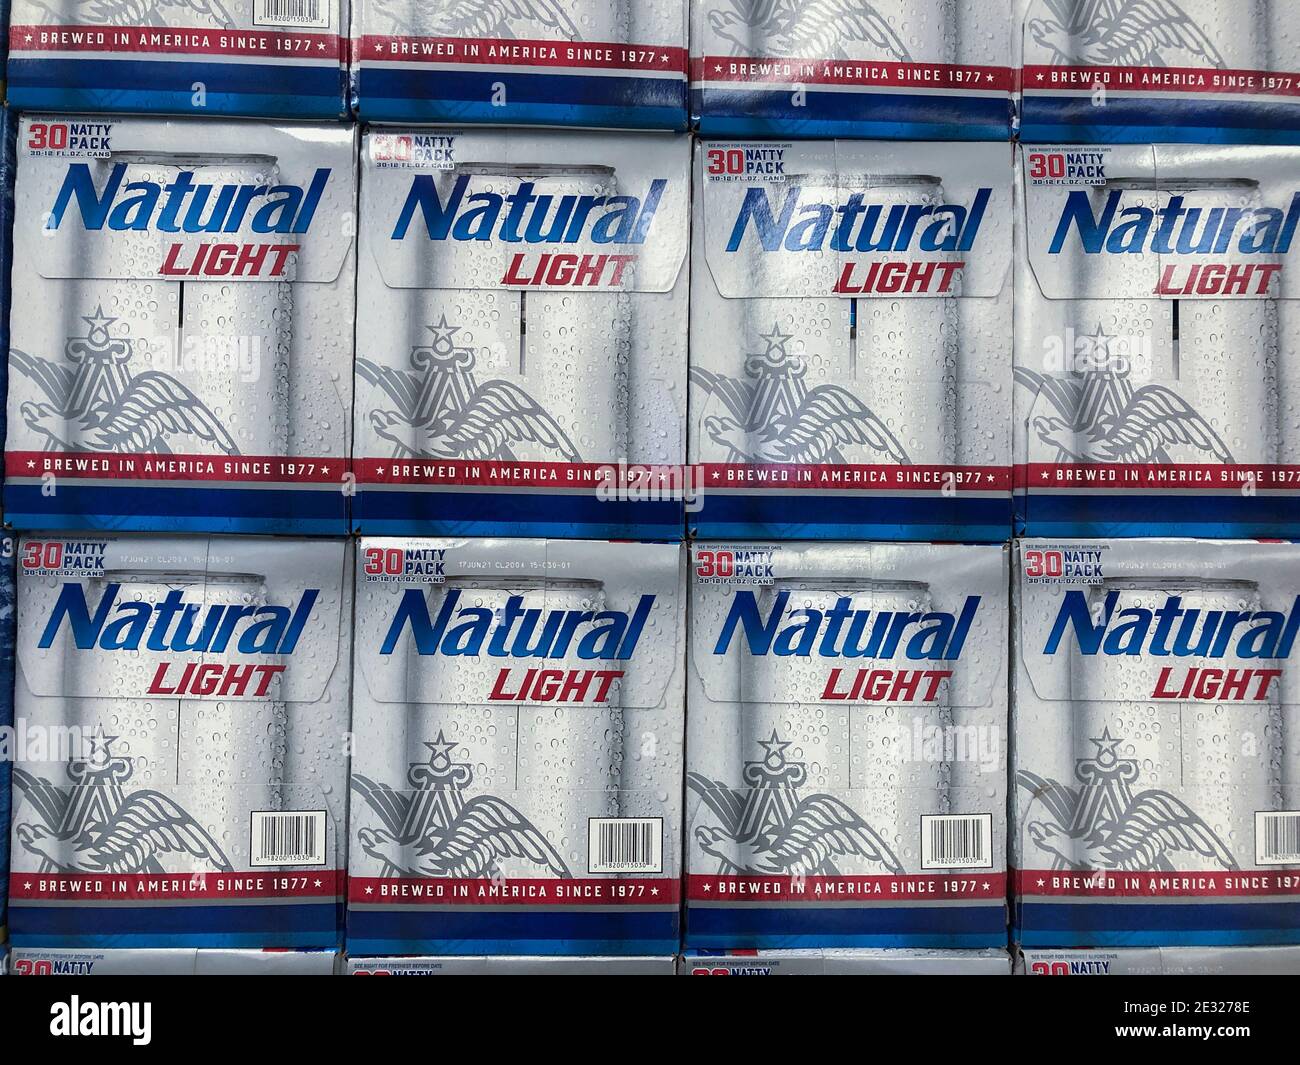 Indianapolis - Circa January 2021: Natural Light beer display. Natural Light is brewed by Anheuser Busch and is known as Natty Light. Stock Photo